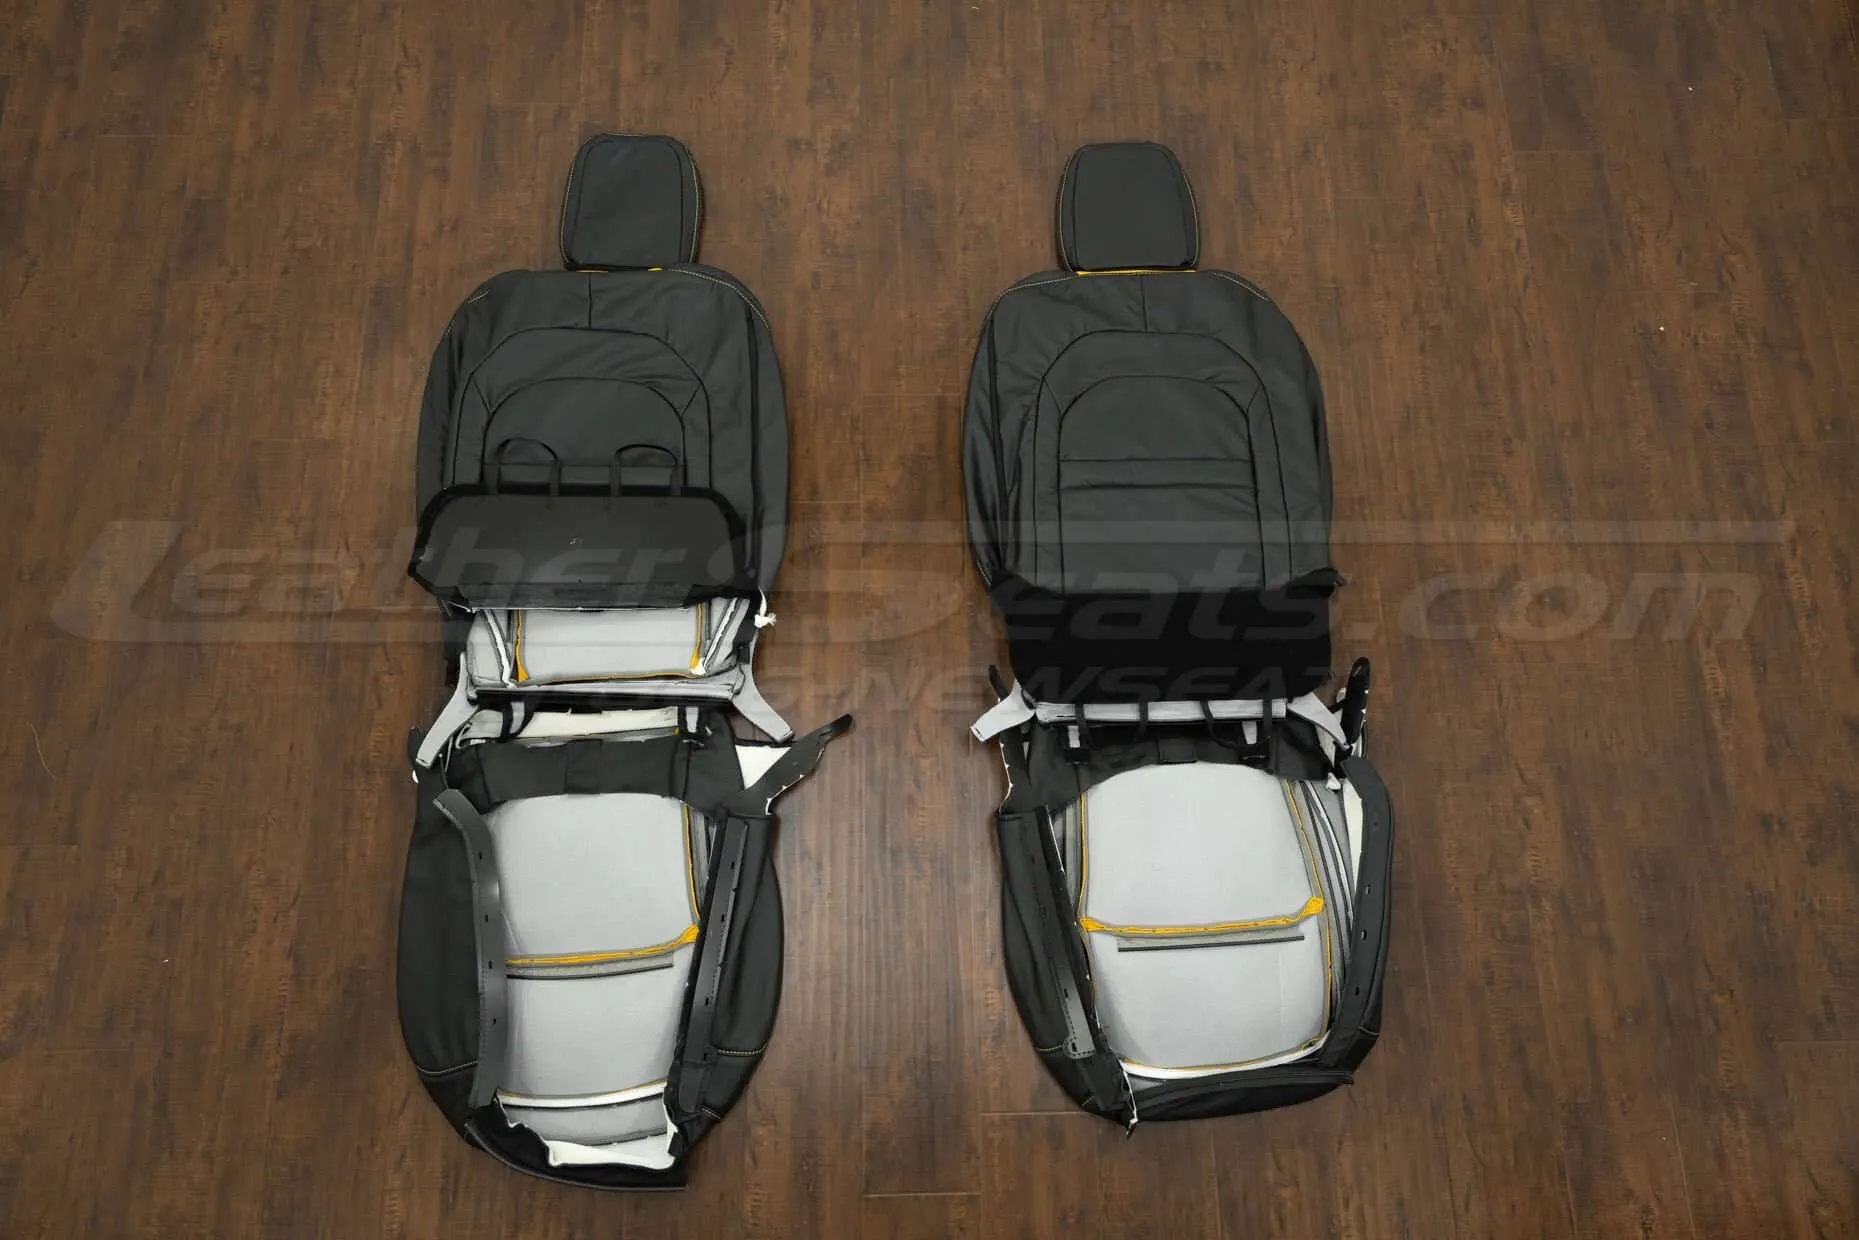 2018-2021 Jeep Wrangler Upholstery kit - Black & Velocity Yellow - Back view of front seats